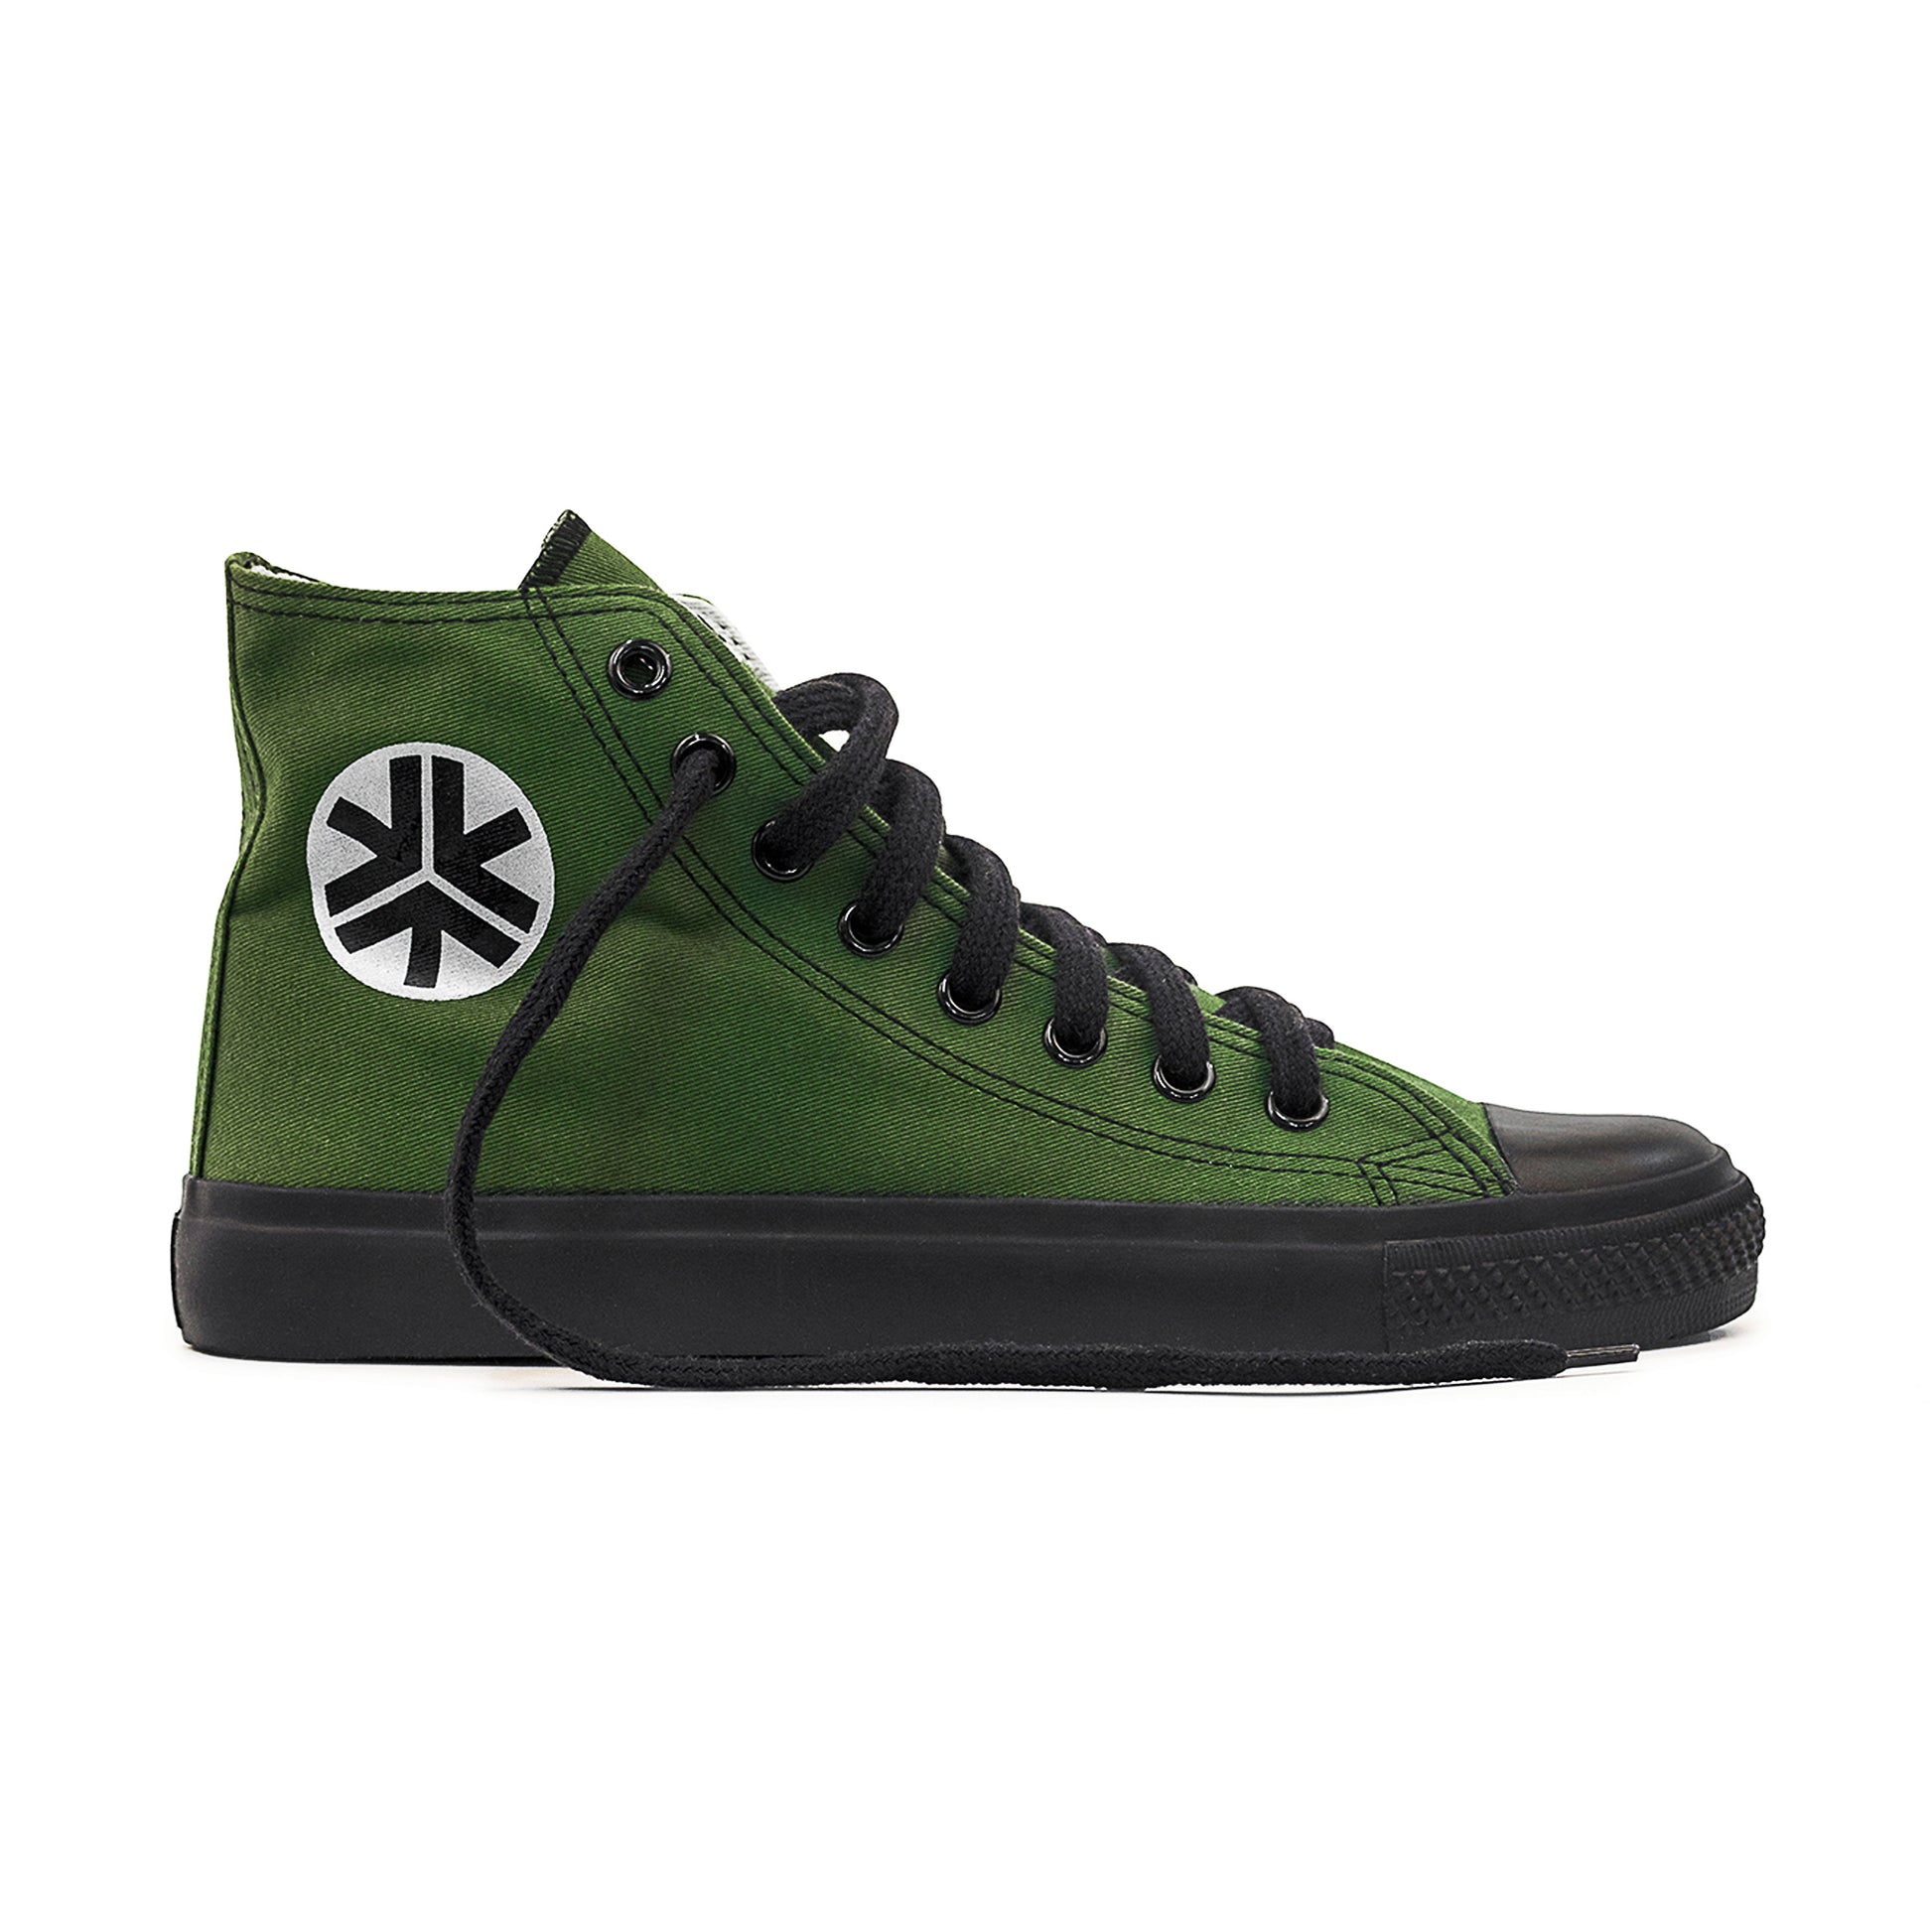 Etiko Vegan High Top Olive and Black Sneakers Organic and Fairtrade Certified Ethical Sneakers